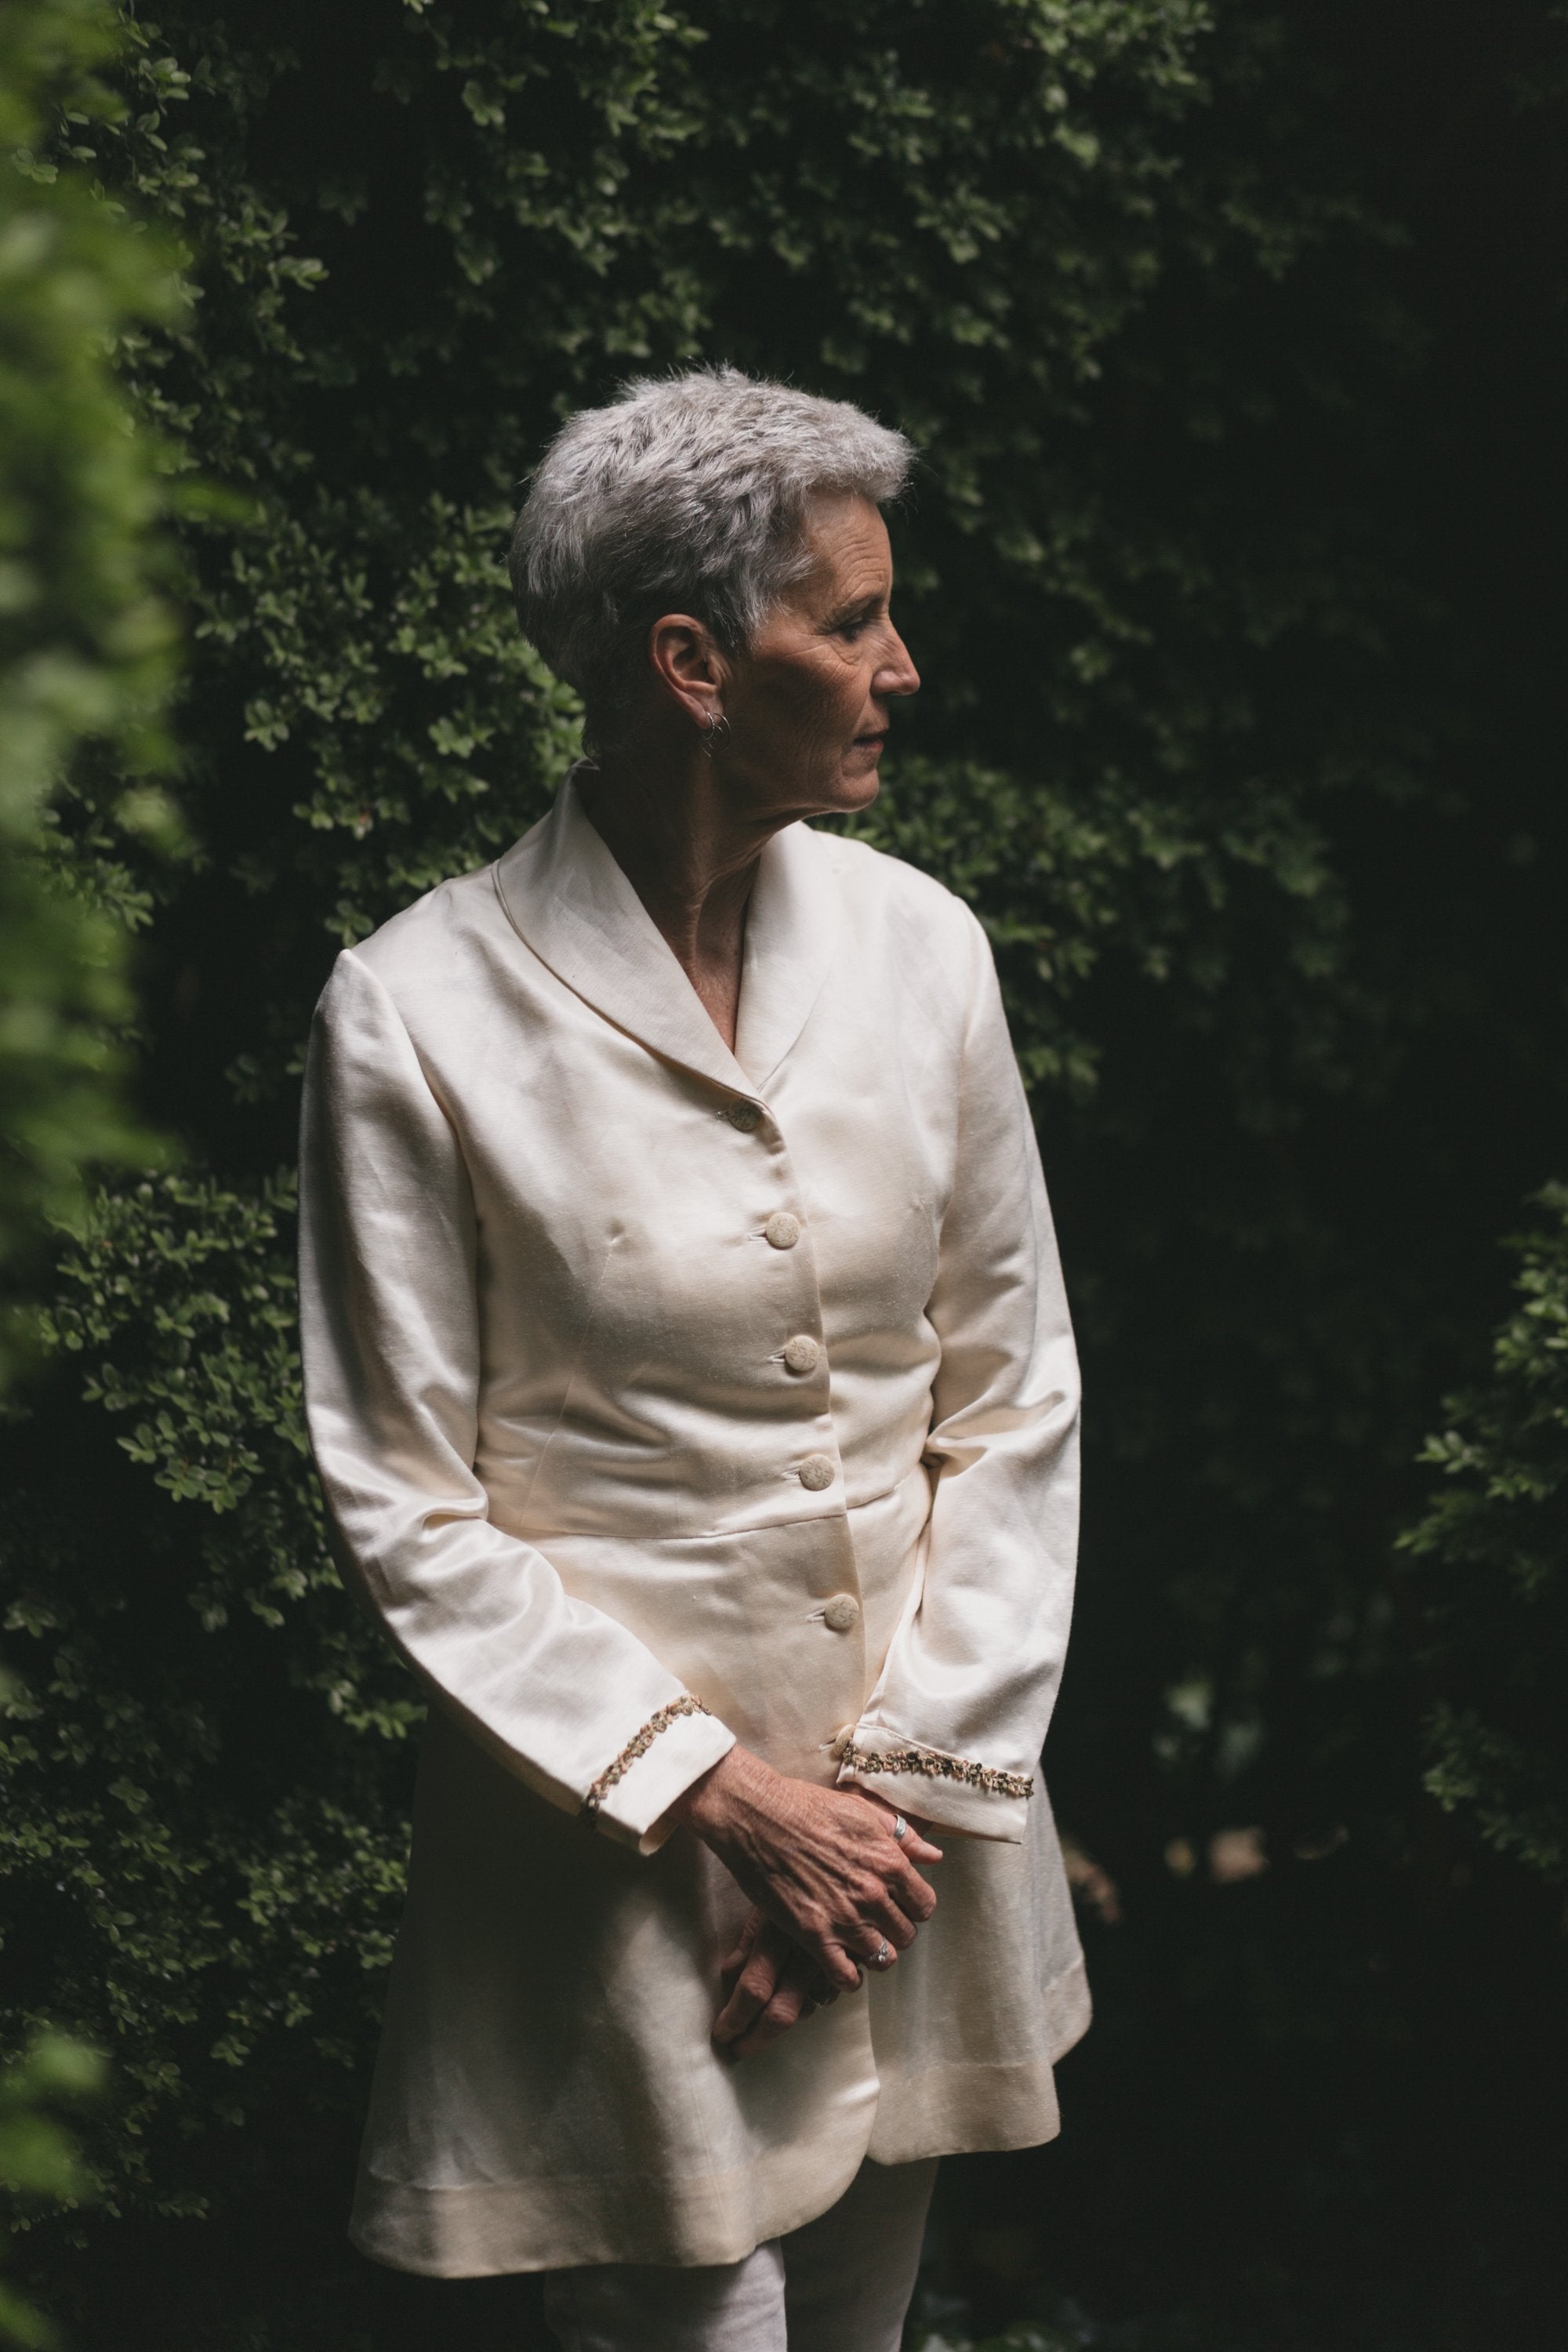 Older white woman with grey hair standing with hands in the front one on top of the other,looking to her left surrounded by greenery wearing the Countryside Frock Coat buttoned in white.